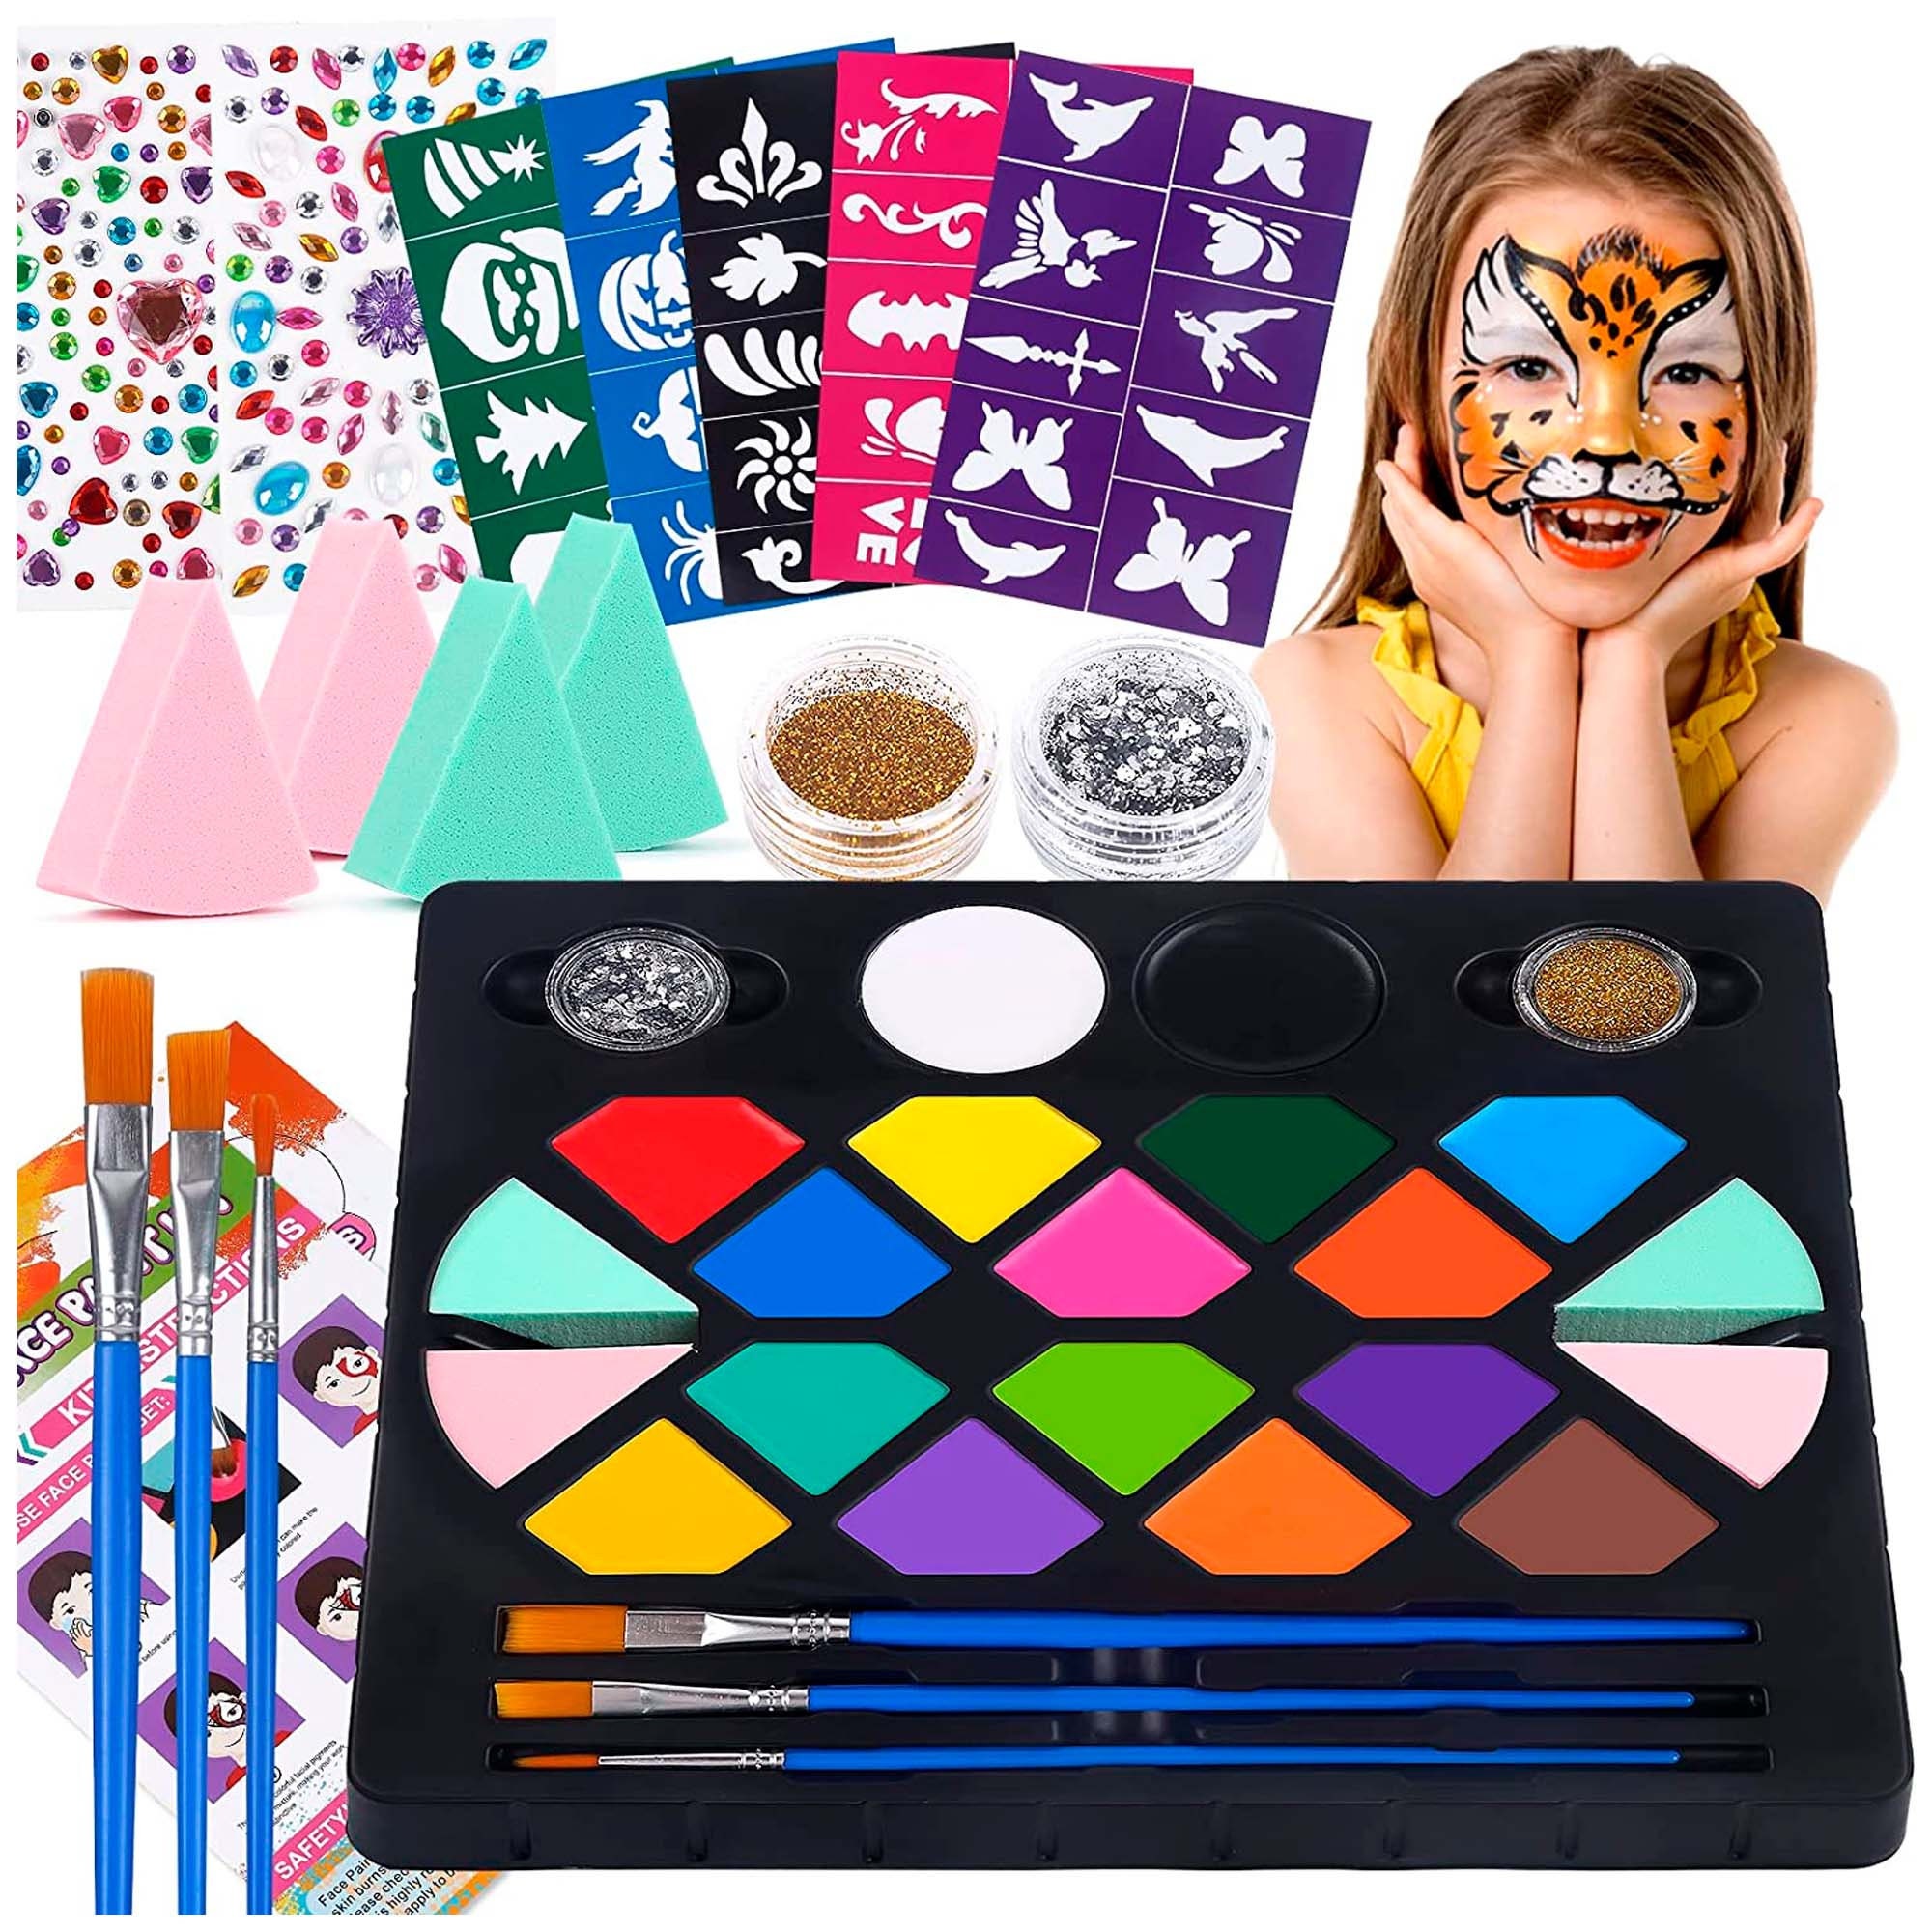 Face Painting Kit for Kids 20 Water Based Non-Toxic Sensitive Skin Paints  100 Stencils 3 Glitters 2 Hair Chalks Combs 2 Tattoos Sheets 4 Colors Split